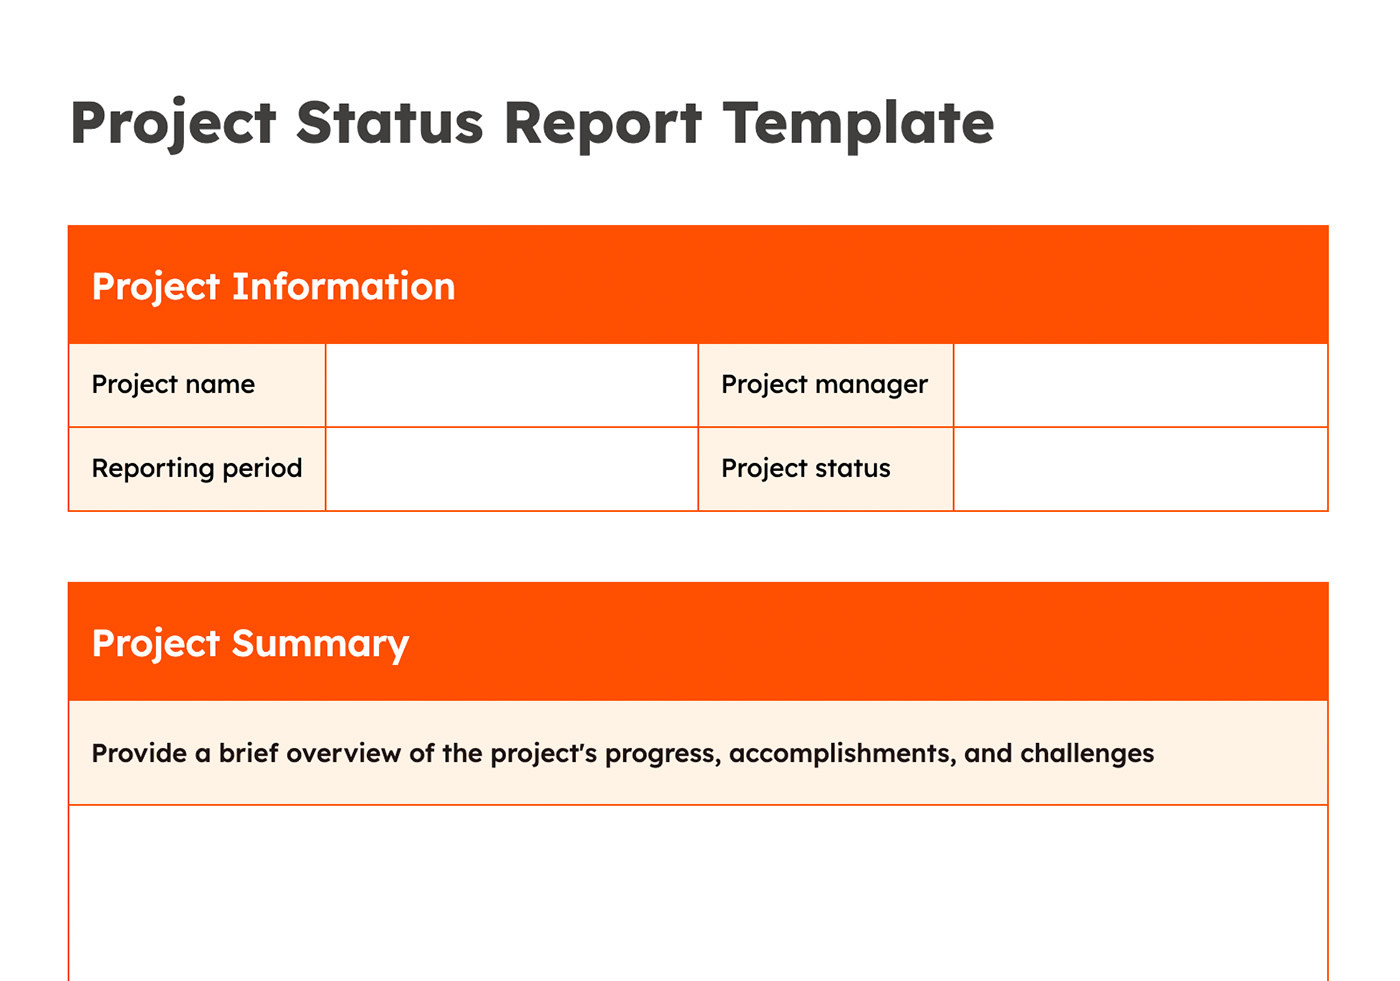 Screenshot of a project status report template